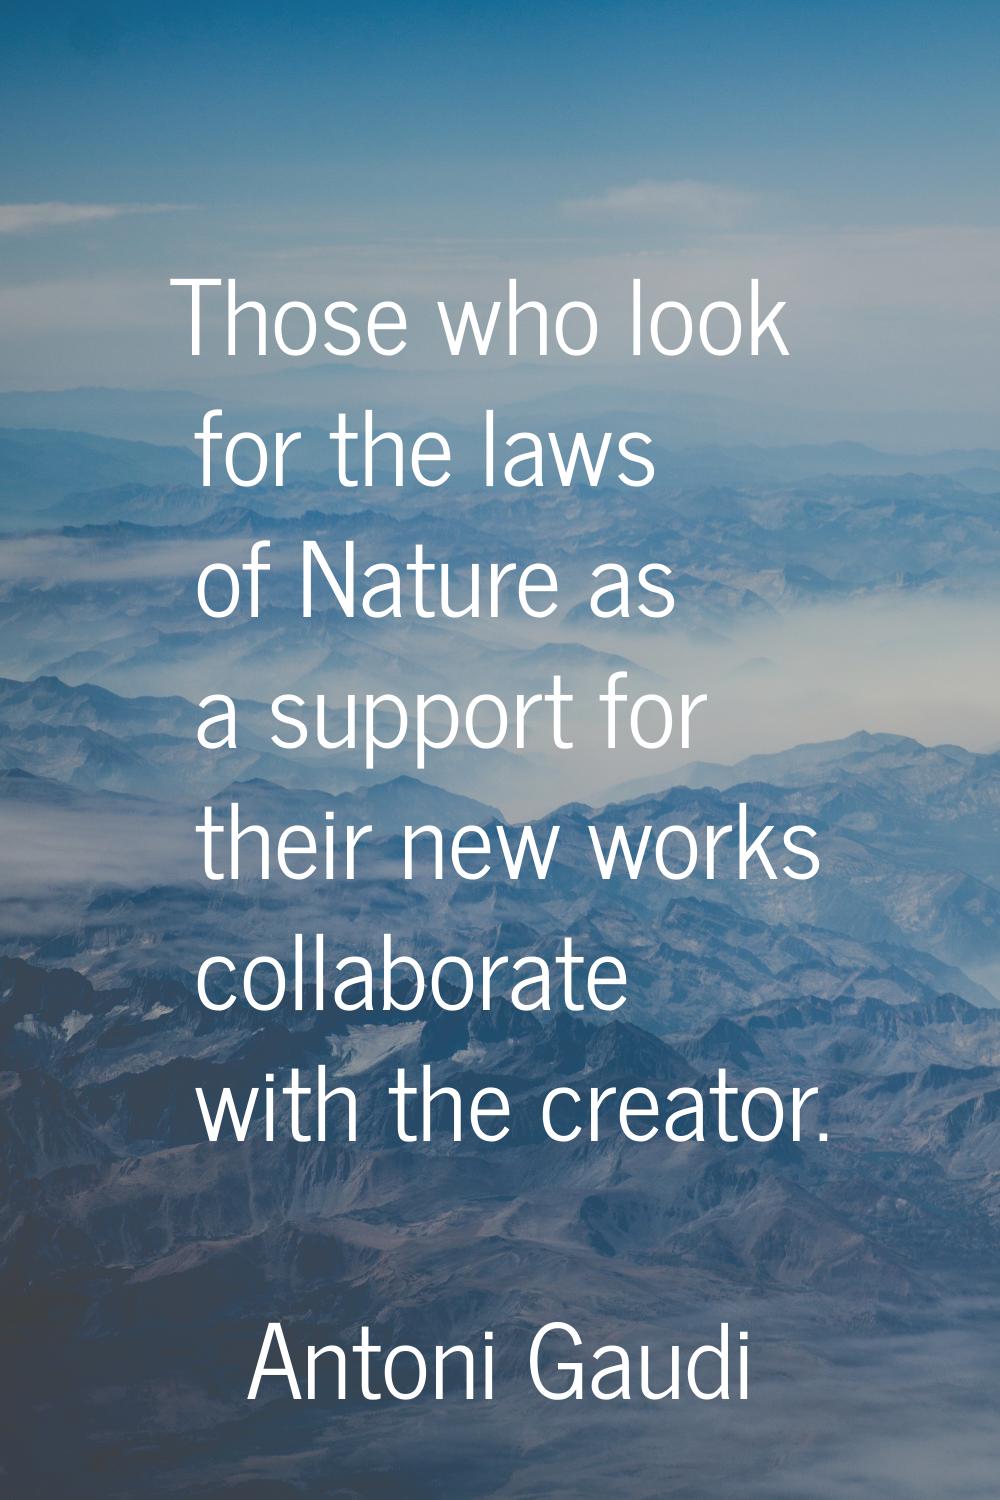 Those who look for the laws of Nature as a support for their new works collaborate with the creator